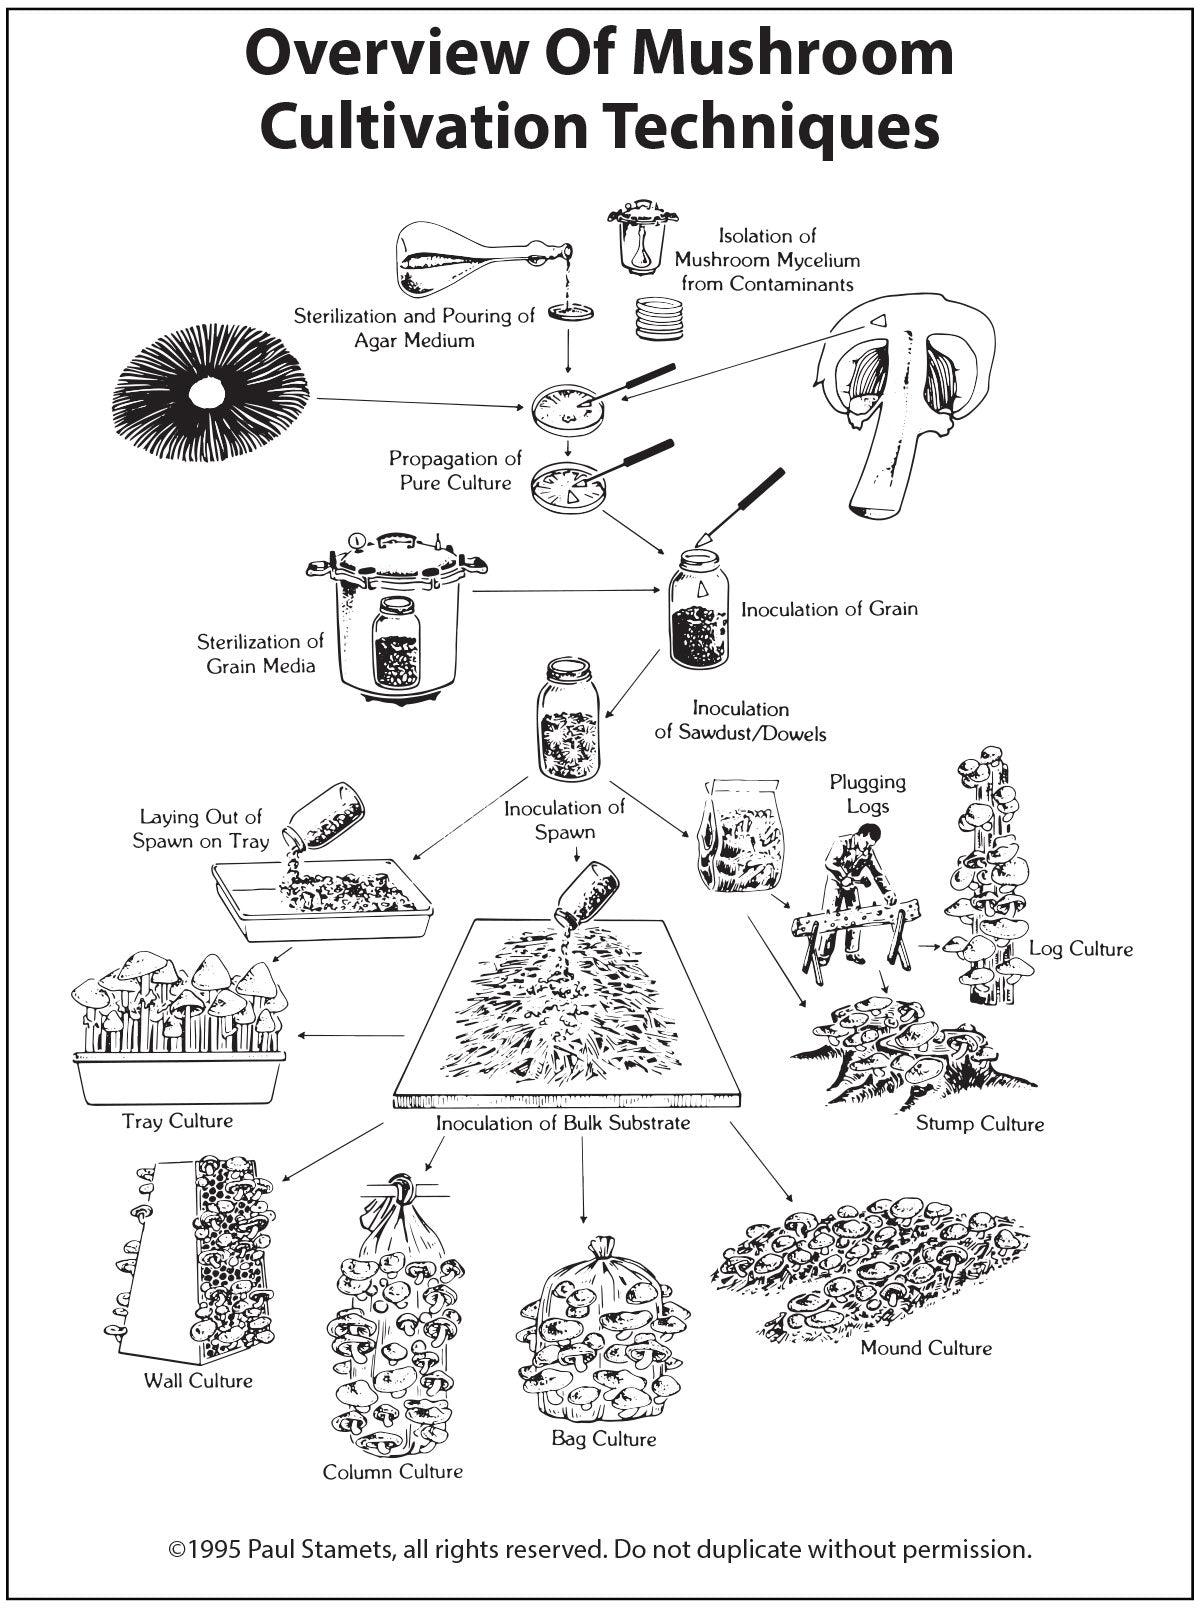 A Pictorial Overview of Mushroom Tissue Culture and Cultivation